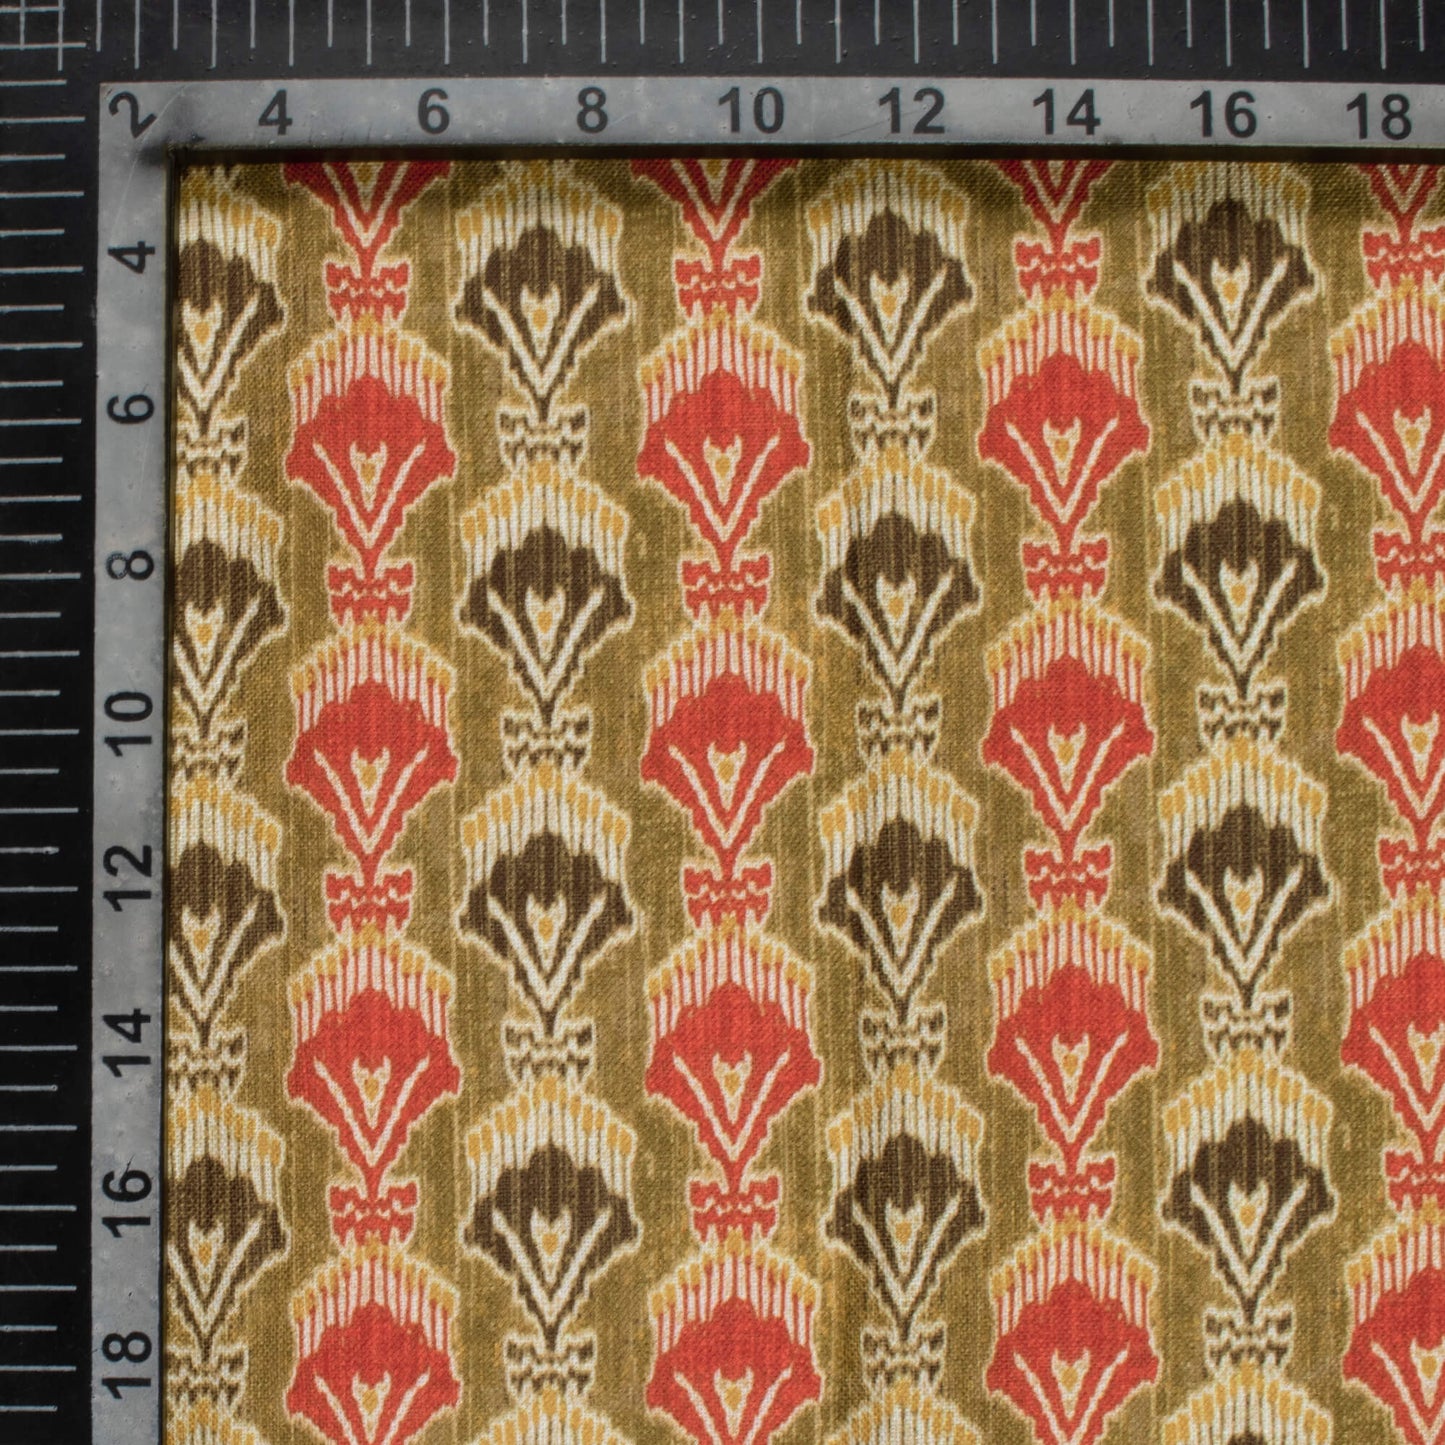 Olive Green And Persian Red Booti Pattern Digital Print Linen Textured Fabric (Width 56 Inches)